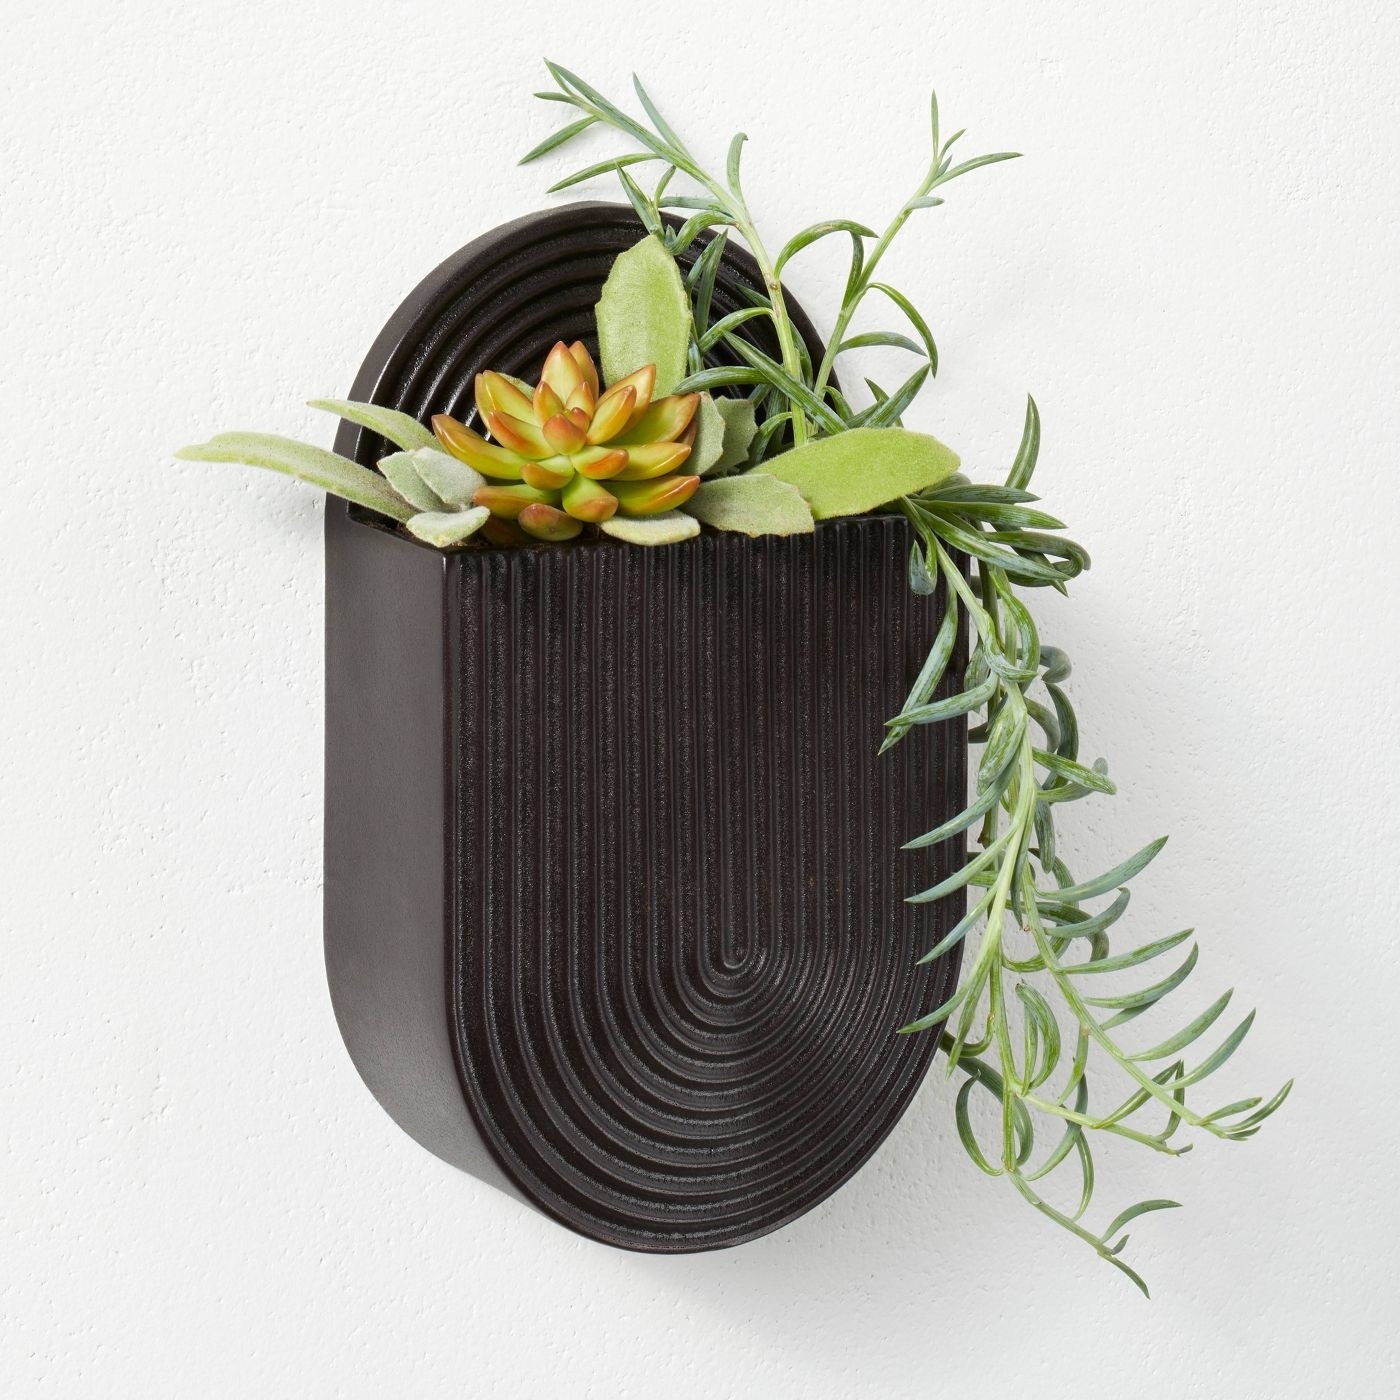 The black ceramic planter. It&#x27;s flattish and oval shaped and has a zen garden-like design on the top. There&#x27;s tiny plants in it; they&#x27;re real cute.